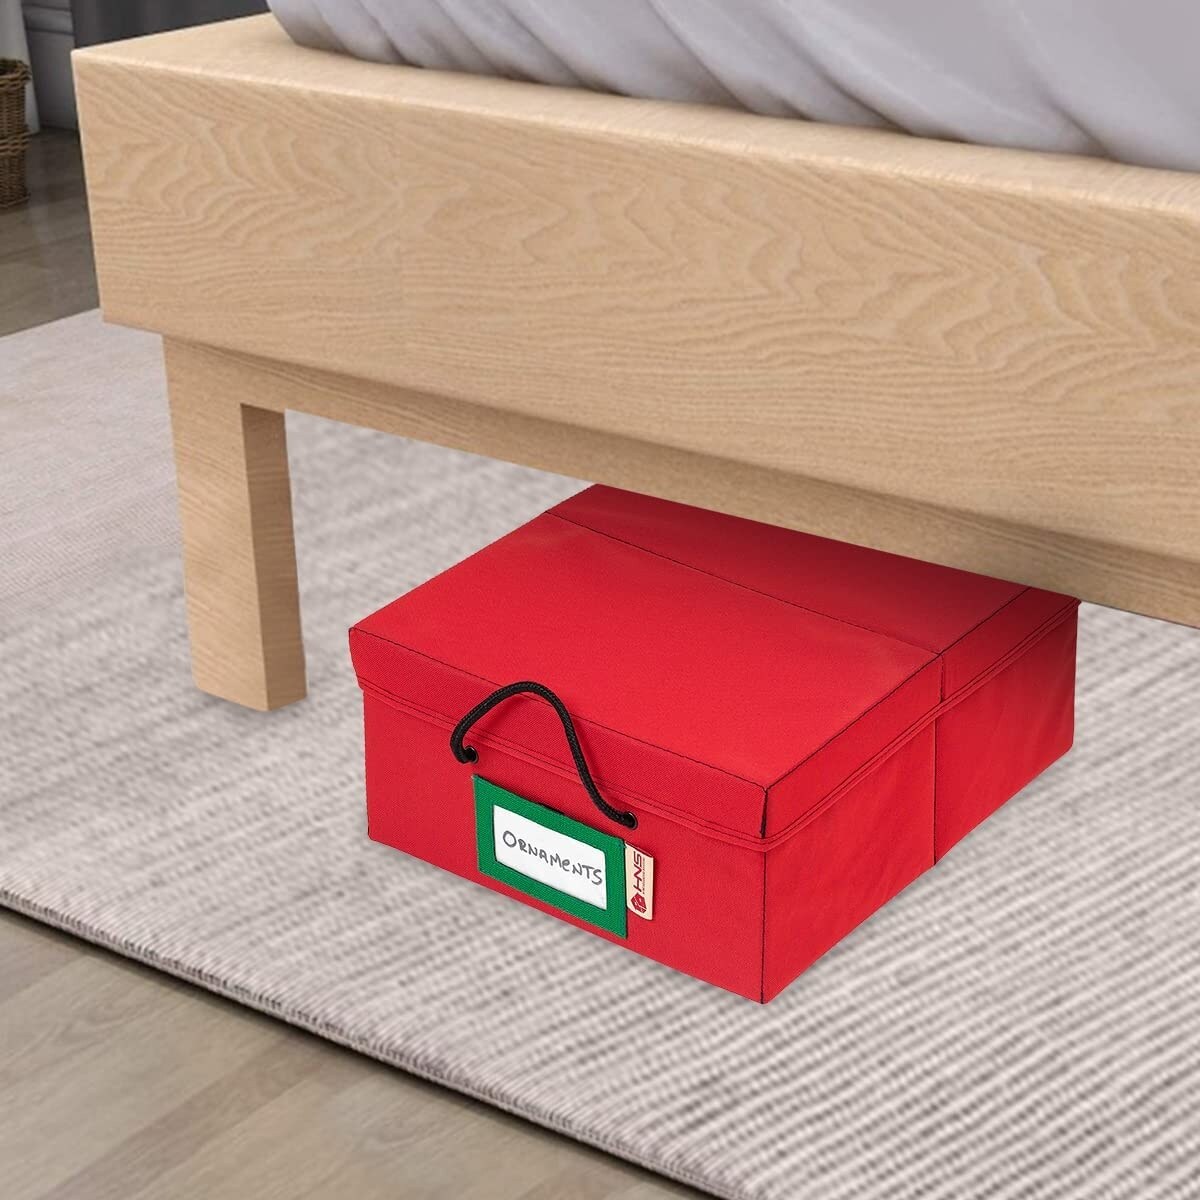 HOLDNundefined STORAGE Underbed Christmas Ornament Storage Container Box  with Dividers - On Sale - Bed Bath & Beyond - 36812656